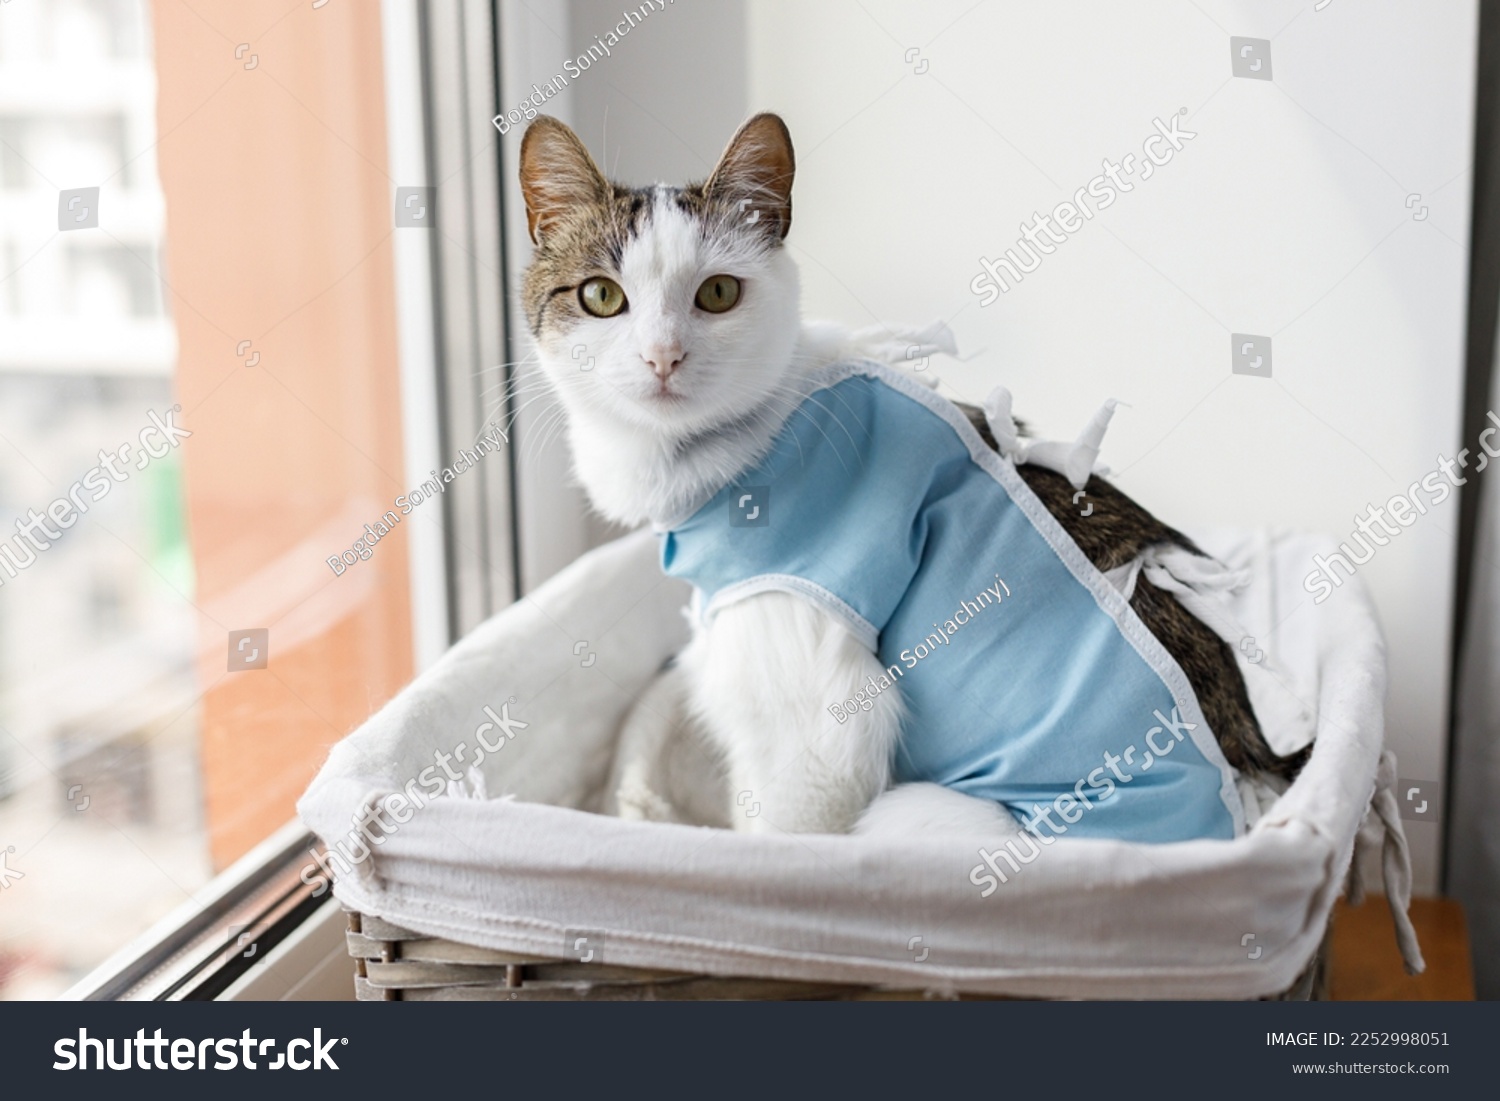 Cute cat after spaying sitting in basket at window. Post-operative Care. Pet sterilization concept. Adorable kitty portrait in special suit bandage recovering after surgery #2252998051